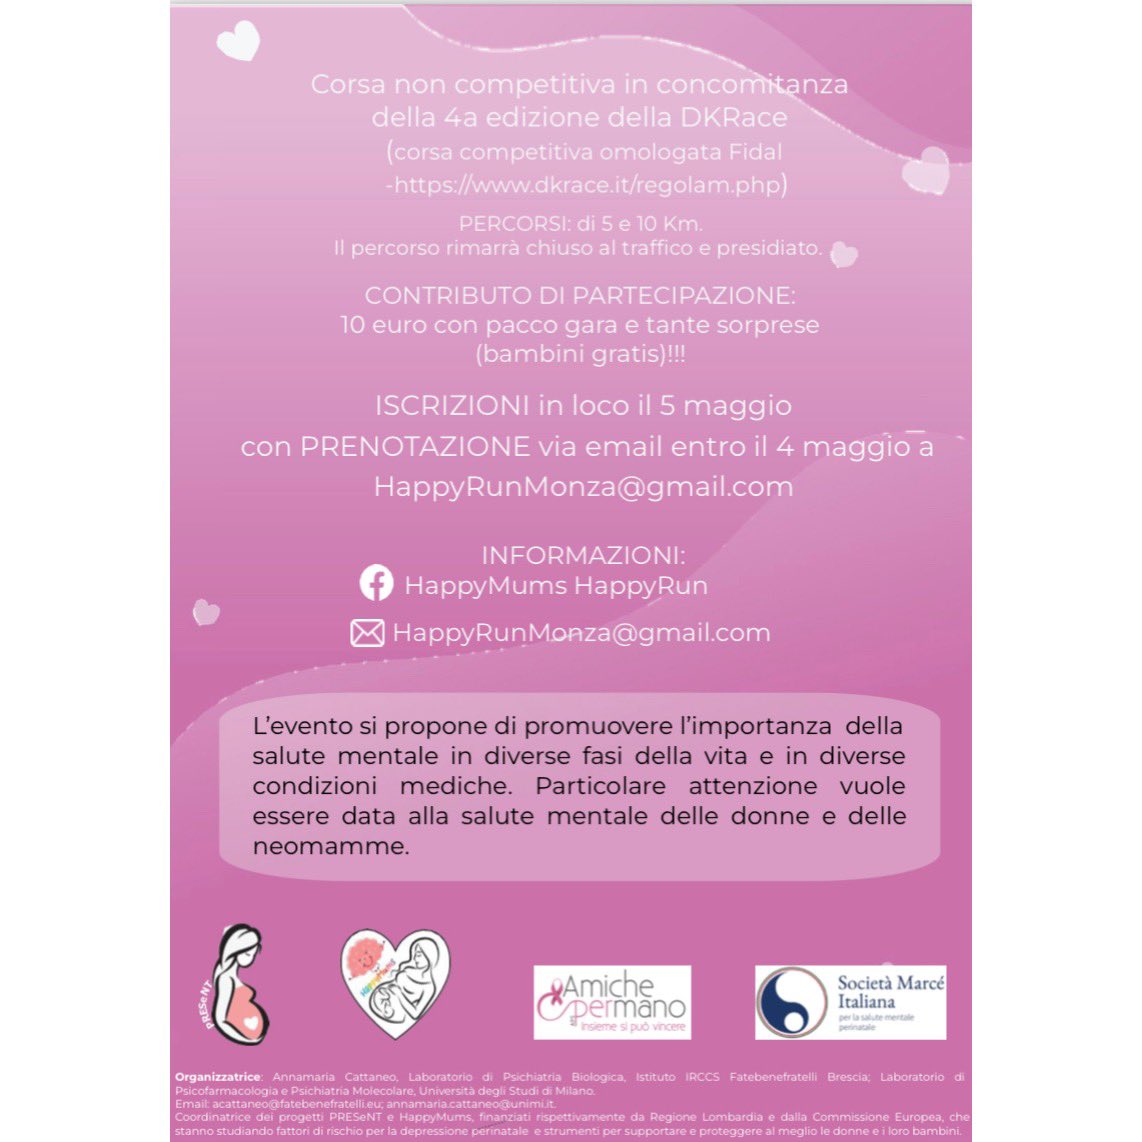 In 1 week we will have the second edition of the HappyRun! If you are visiting Italy and are near Milan, join the #HappyMumsproject 🧠🤰 team and Marcè Society and have a run with us fighting the stigma of mental health in woman! Contact us! #horizonproject #perinatamentalheath